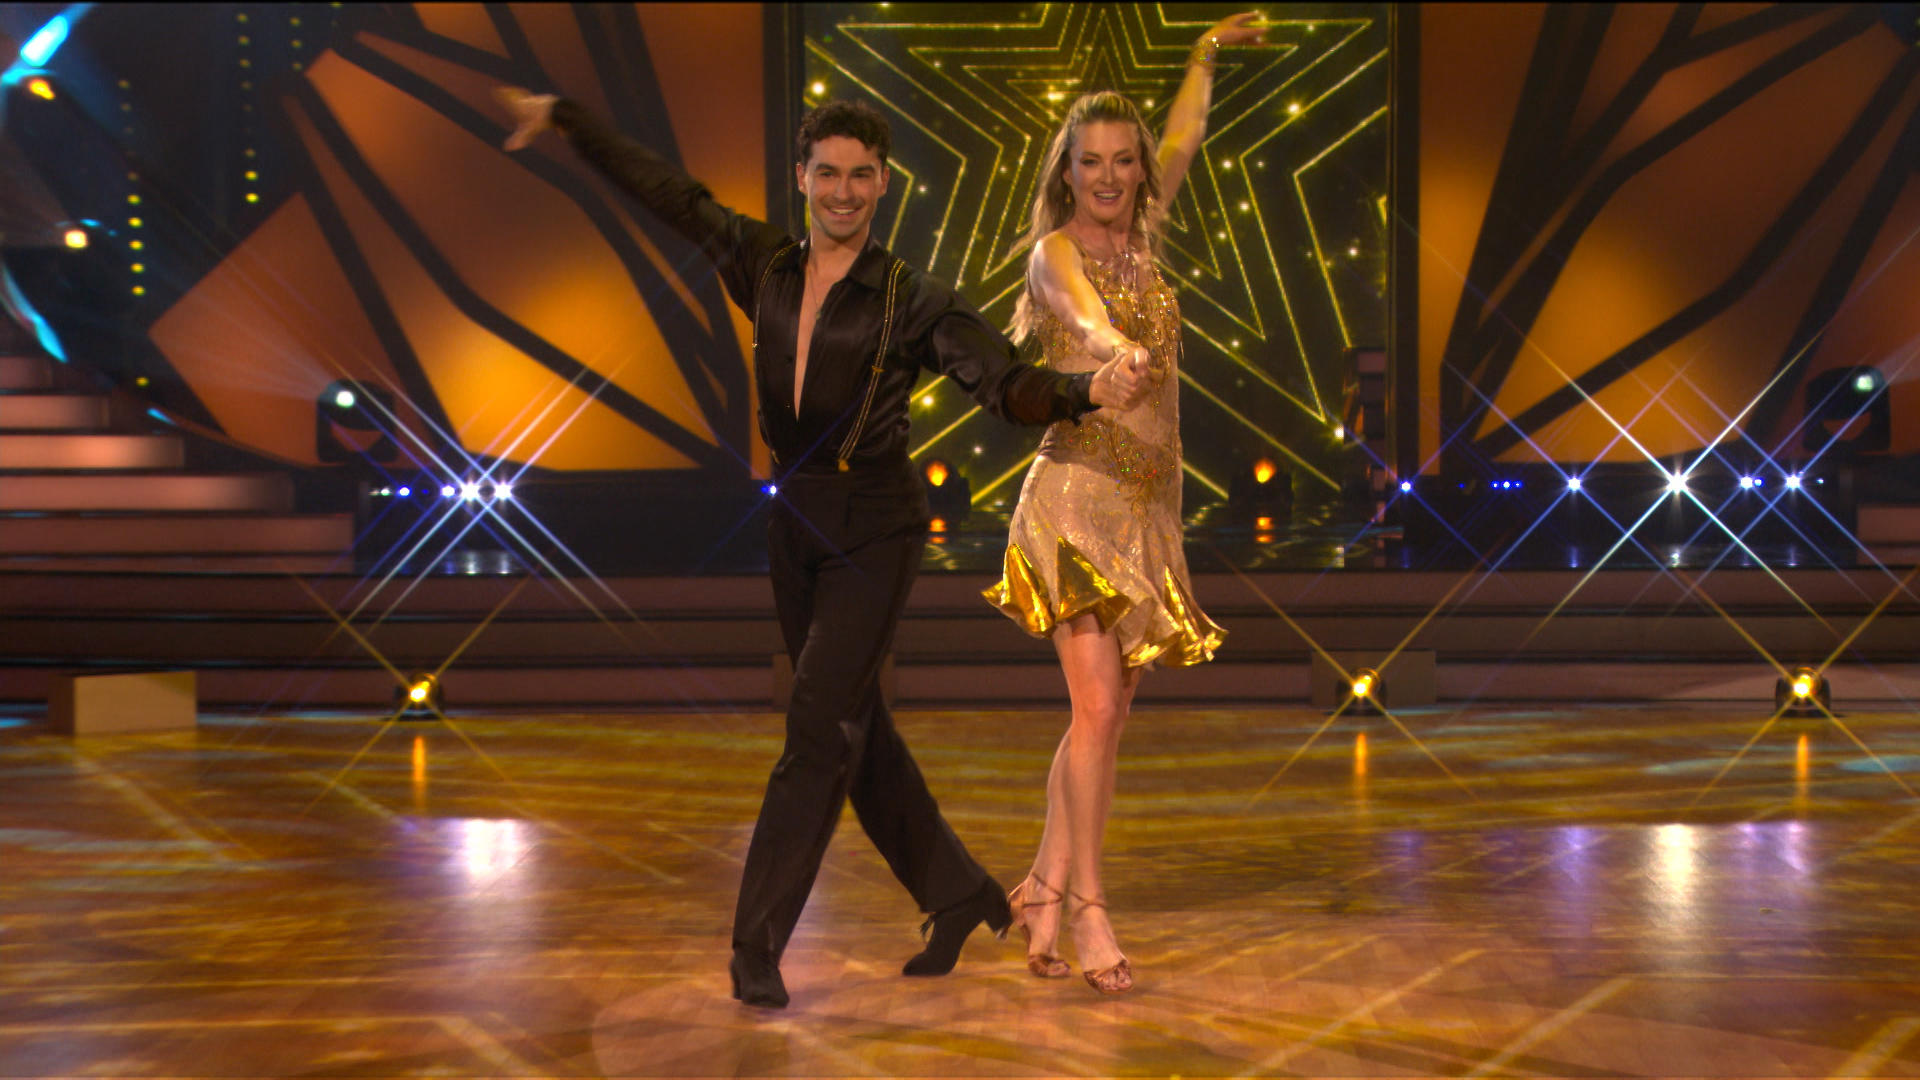 Cha Cha Cha mit Lilly und Andrzej "Let's Dance" Show 1